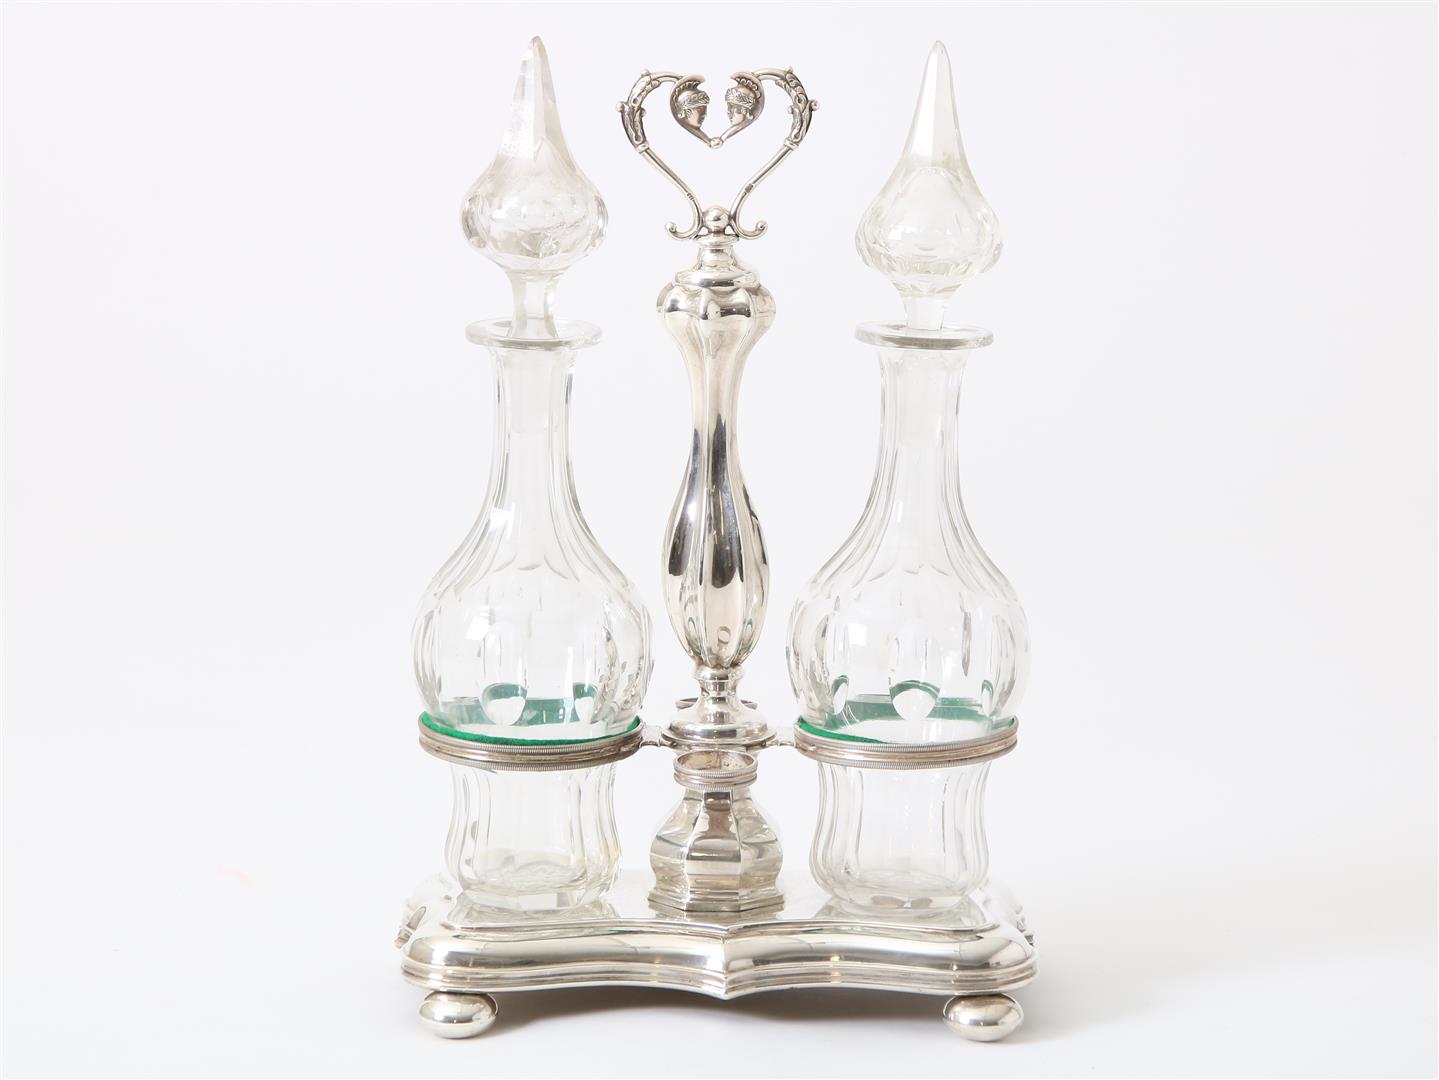 Silver oil and vinegar set with 2 decanters